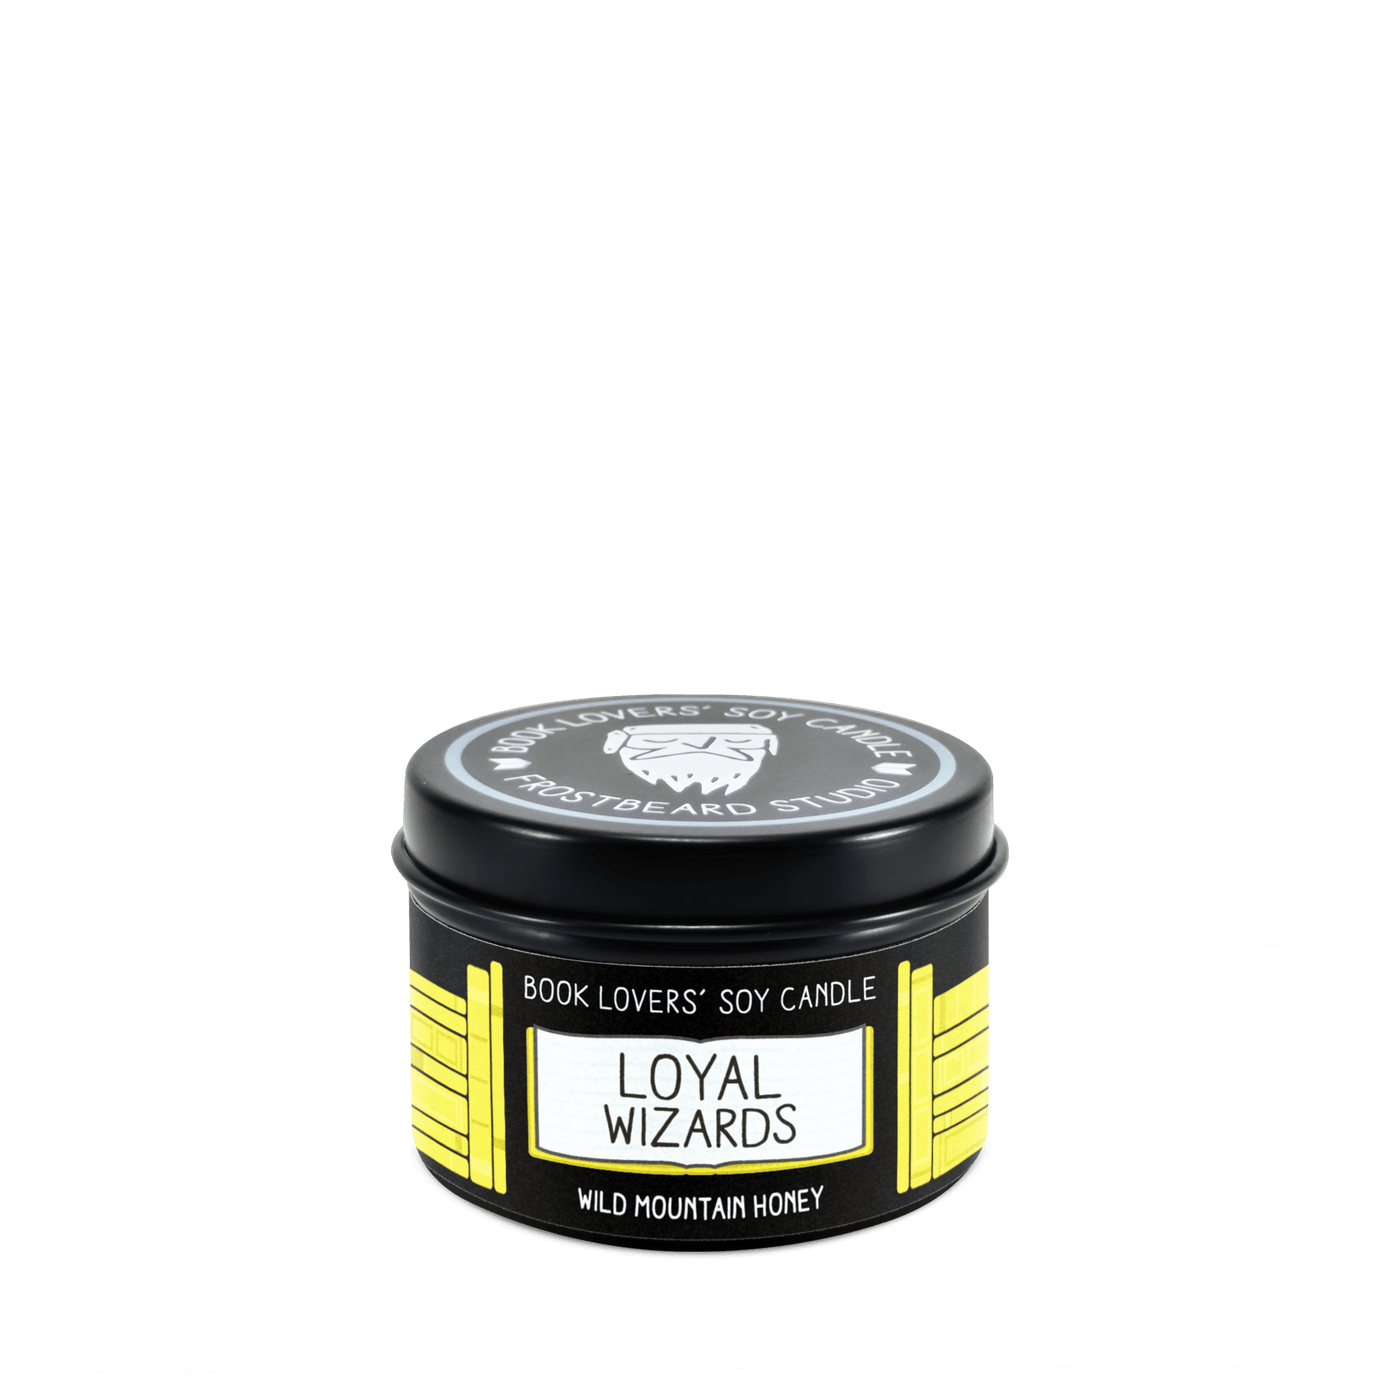 Loyal Wizards - 2 oz Tin - Book Lovers' Soy Candle - Frostbeard Studio